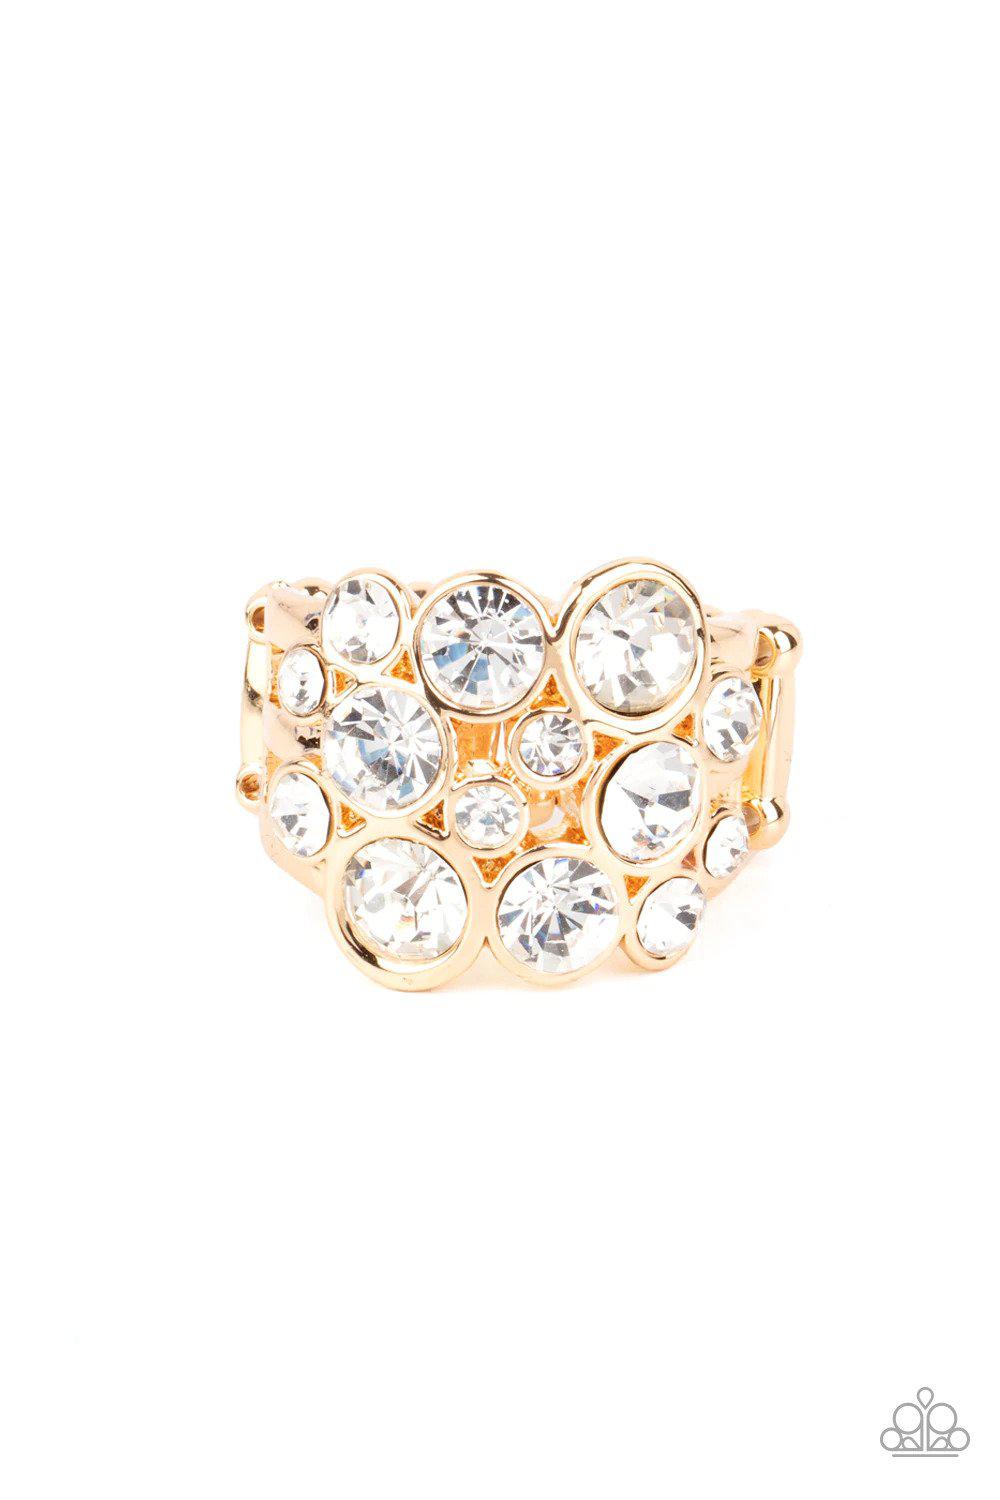 Bubbling Bravado Gold Ring - Paparazzi Accessories- lightbox - CarasShop.com - $5 Jewelry by Cara Jewels